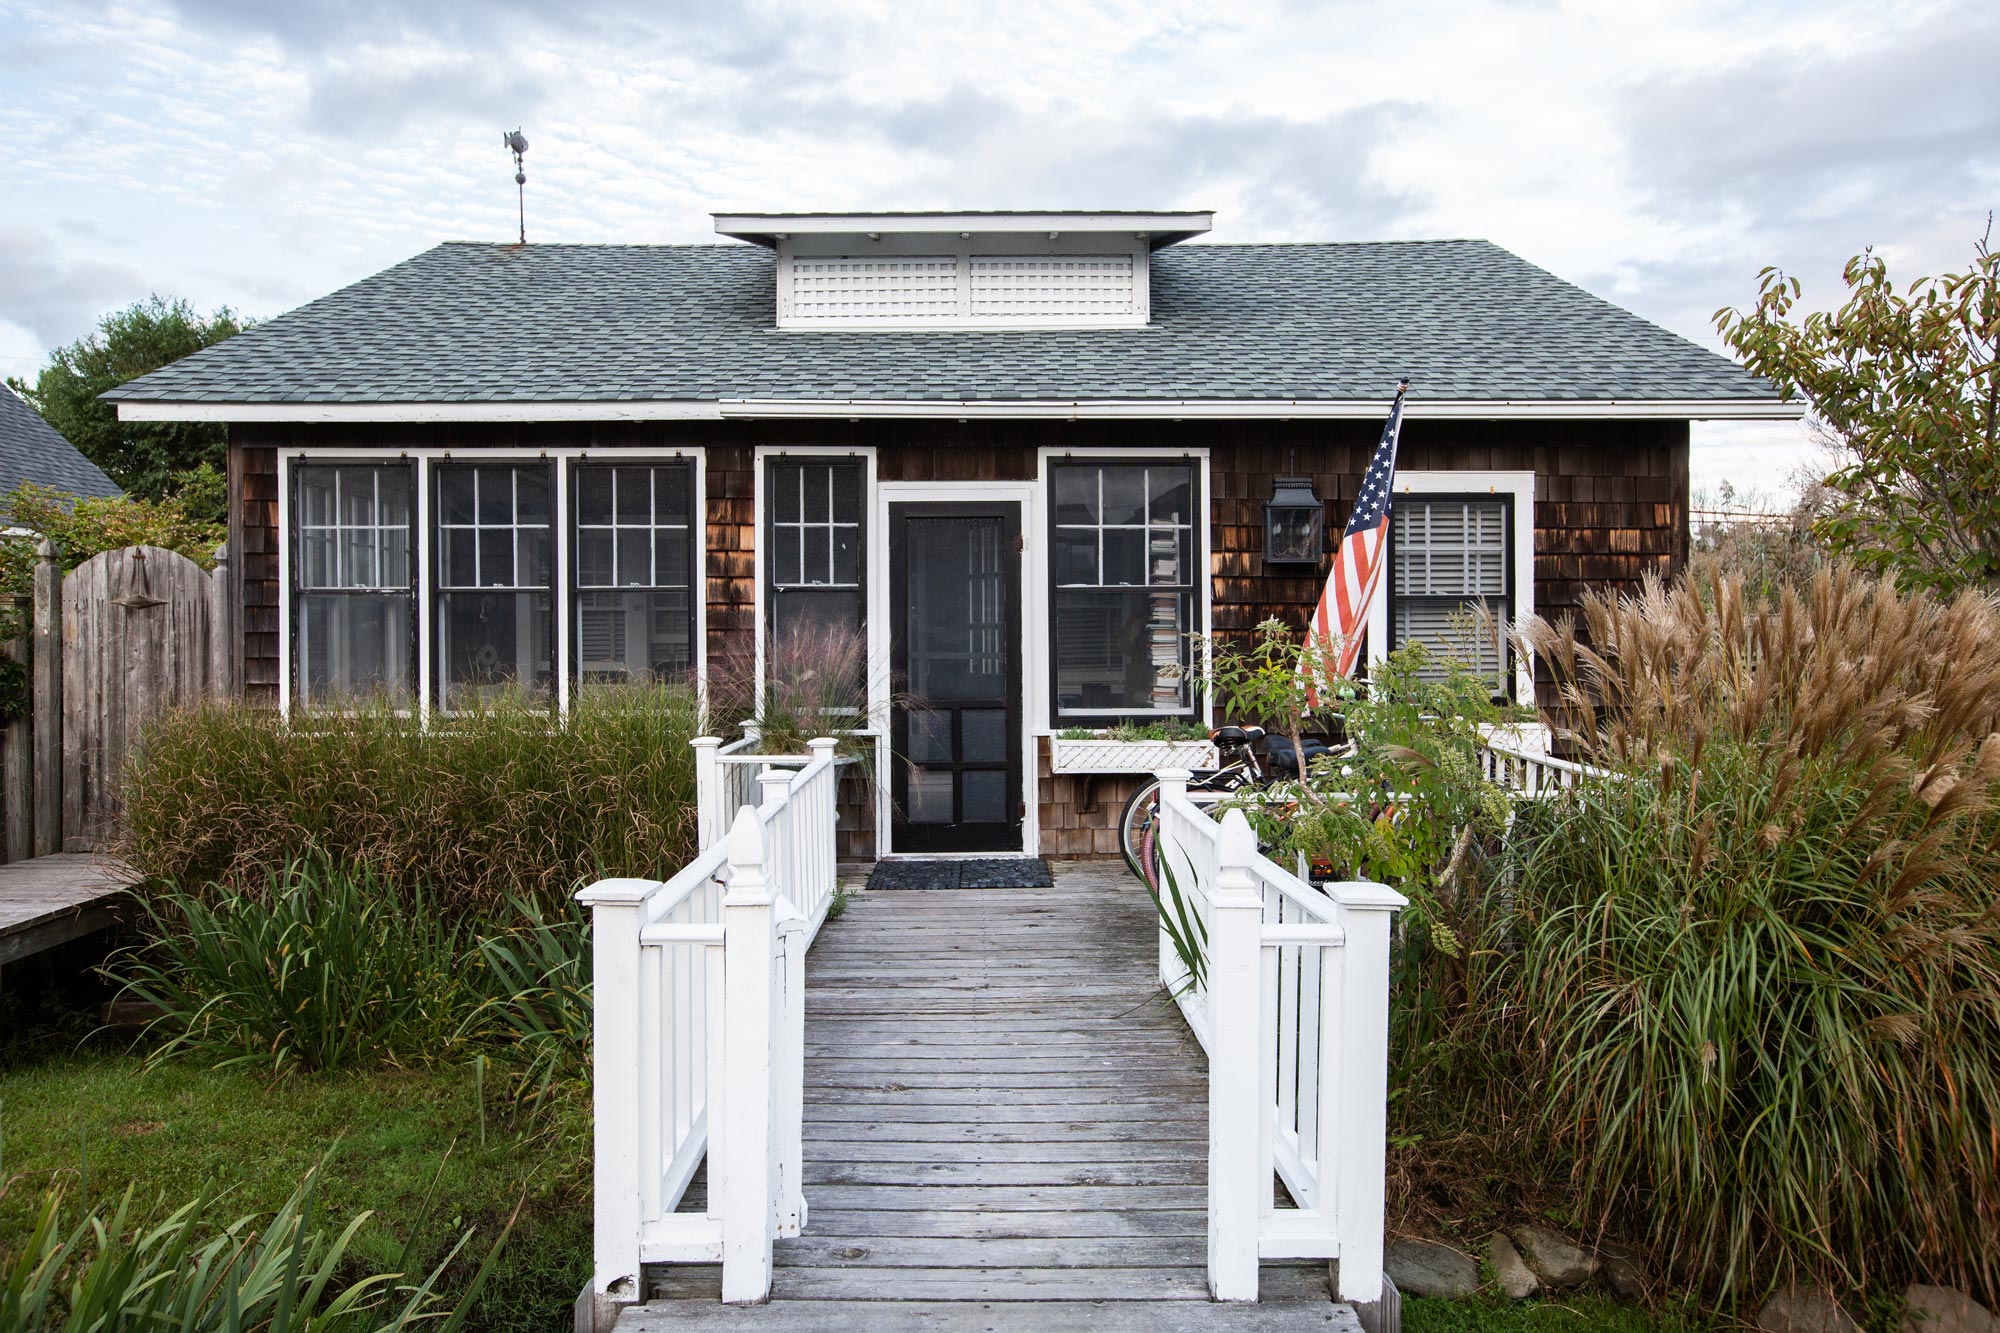 “Everything’s on stilts,” Bates says of Fire Island’s flood-resistant houses and other structures. “Our place is a lower one. We’re about four feet off the ground. Since Hurricane Sandy, a lot of people have had to raise their houses; we haven’t got…